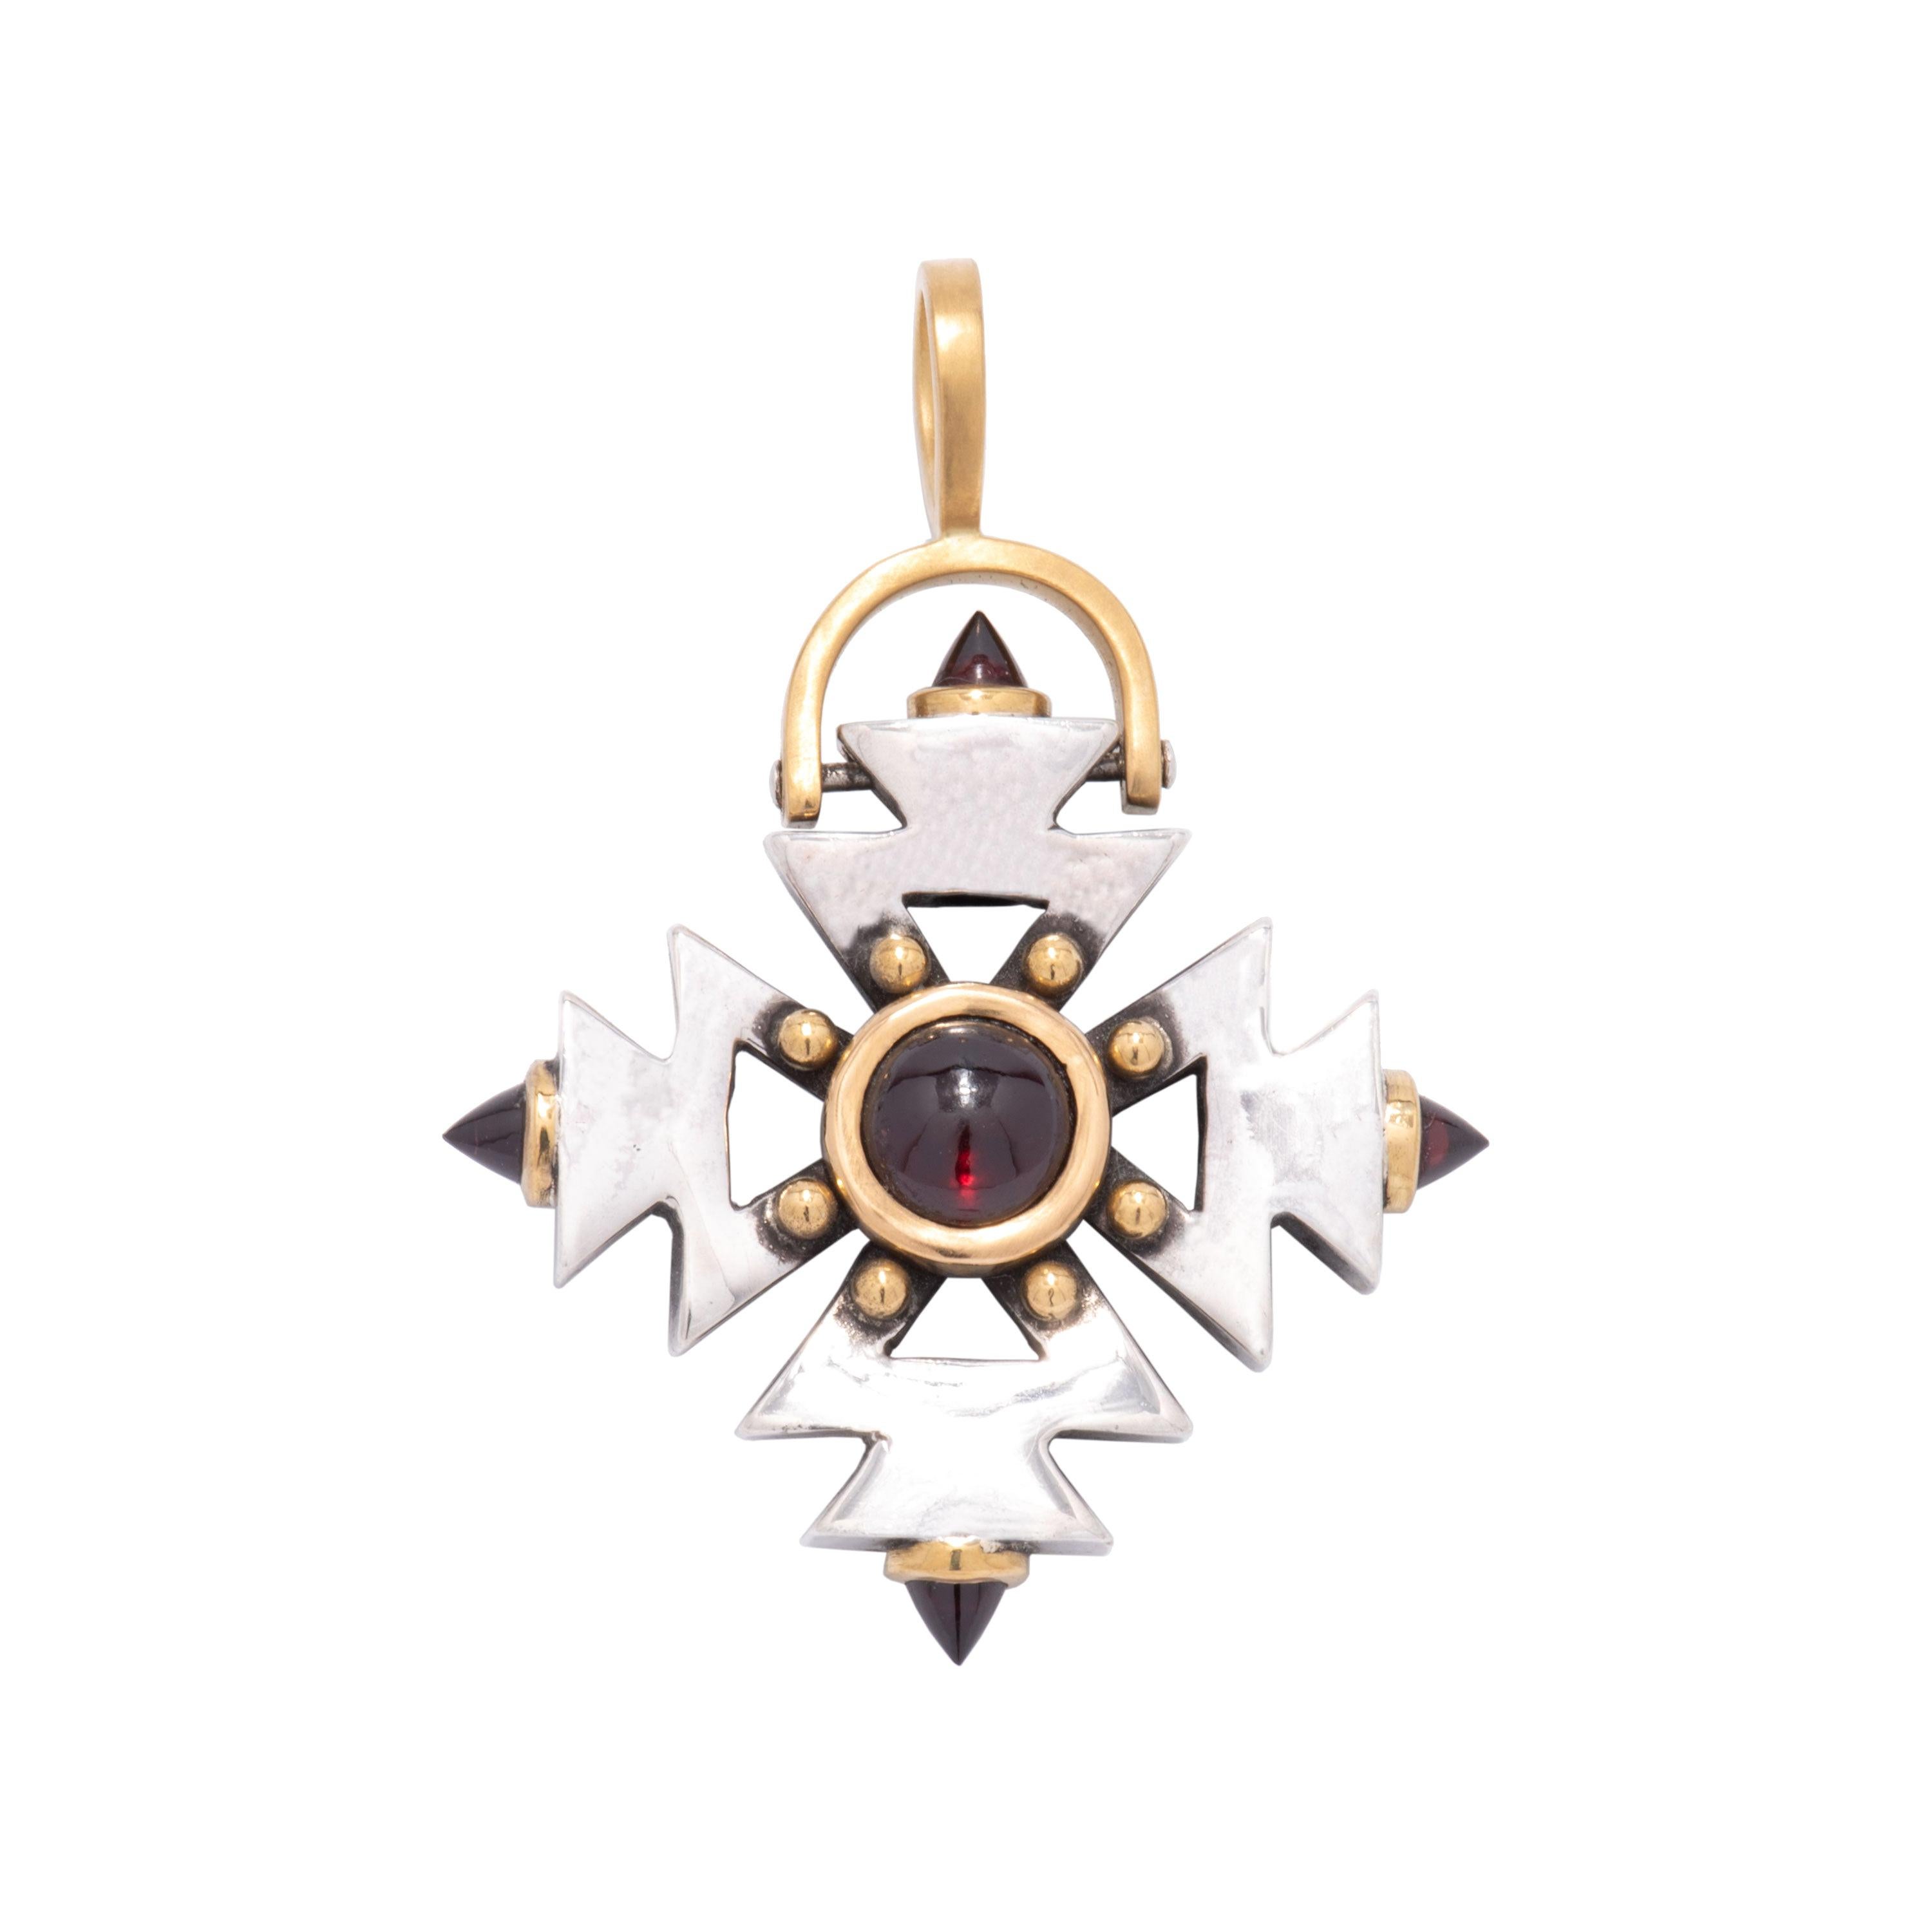 Aztec Cross Pendant with Garnet Points in Sterling Silver and 22 Karat Gold